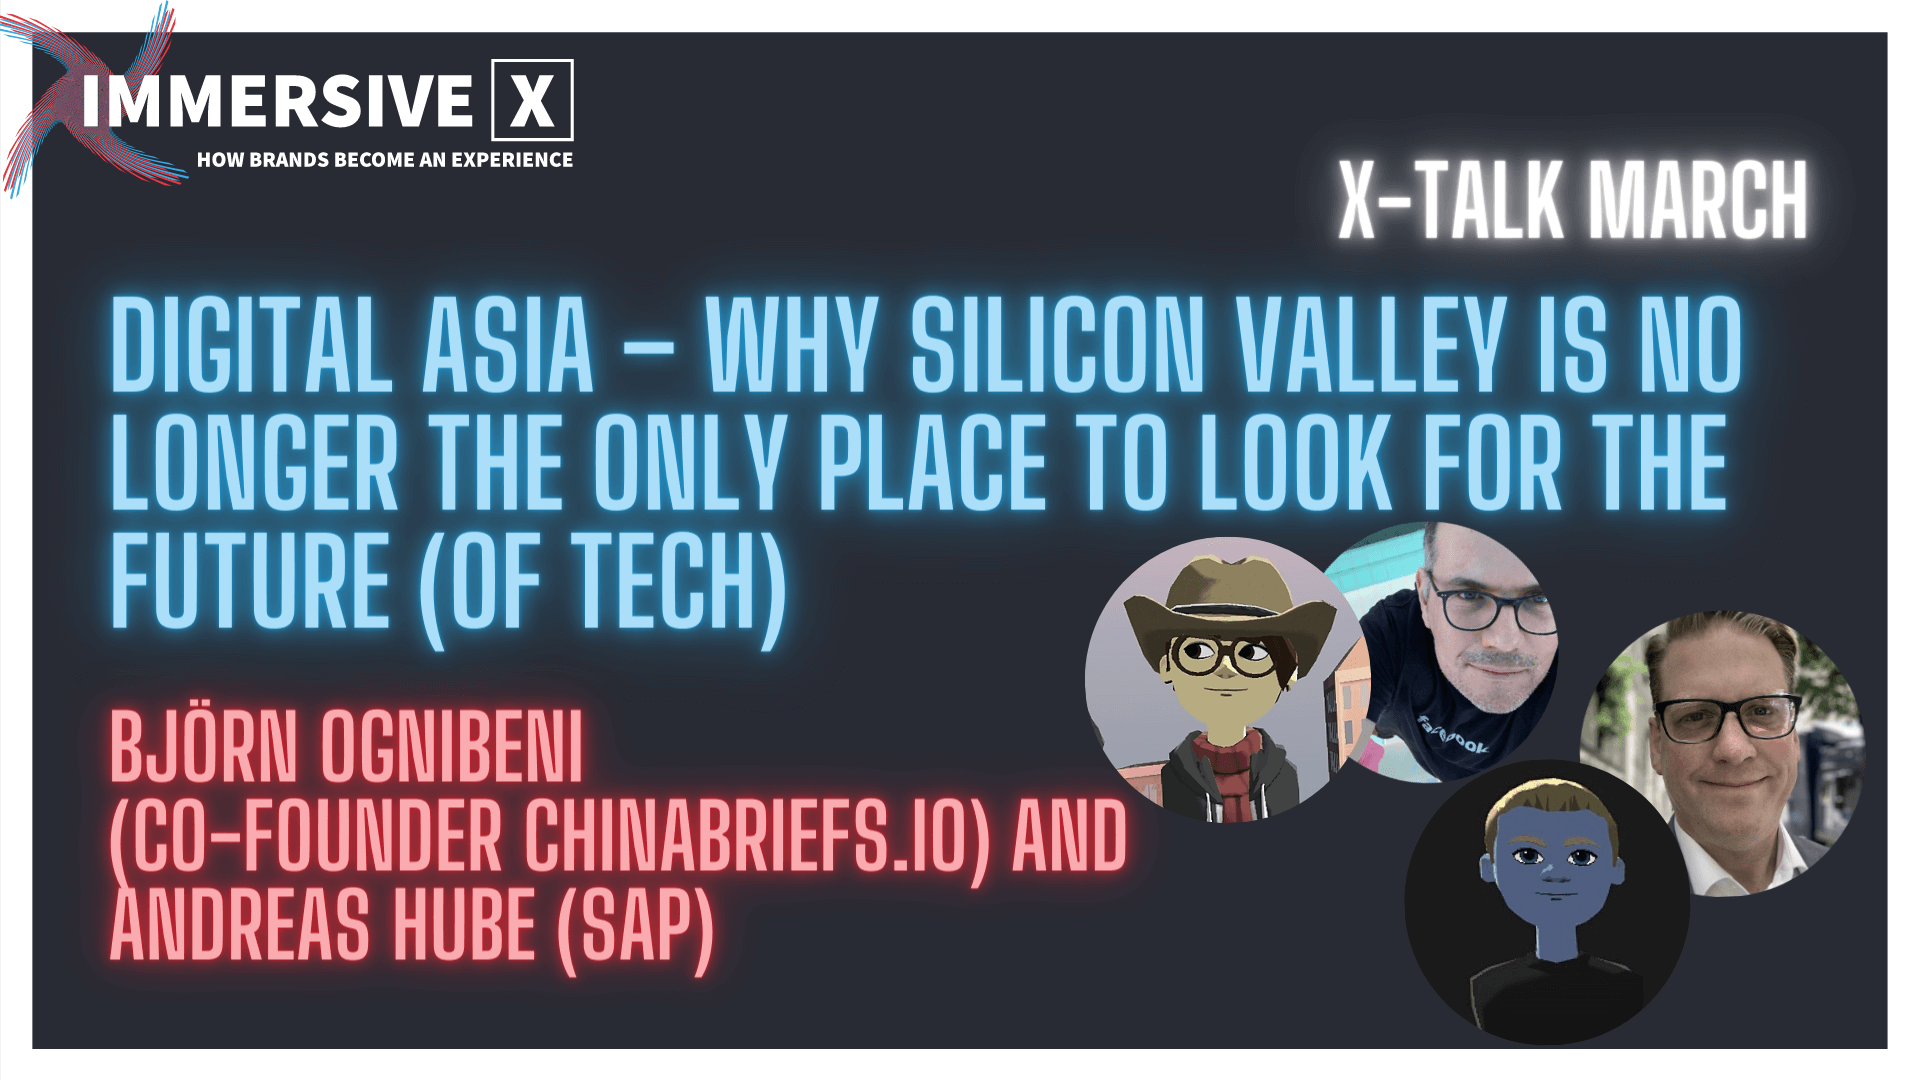 Digital Asia - Why Silicon Valley is no longer the only Place to look for the Future (of Tech)